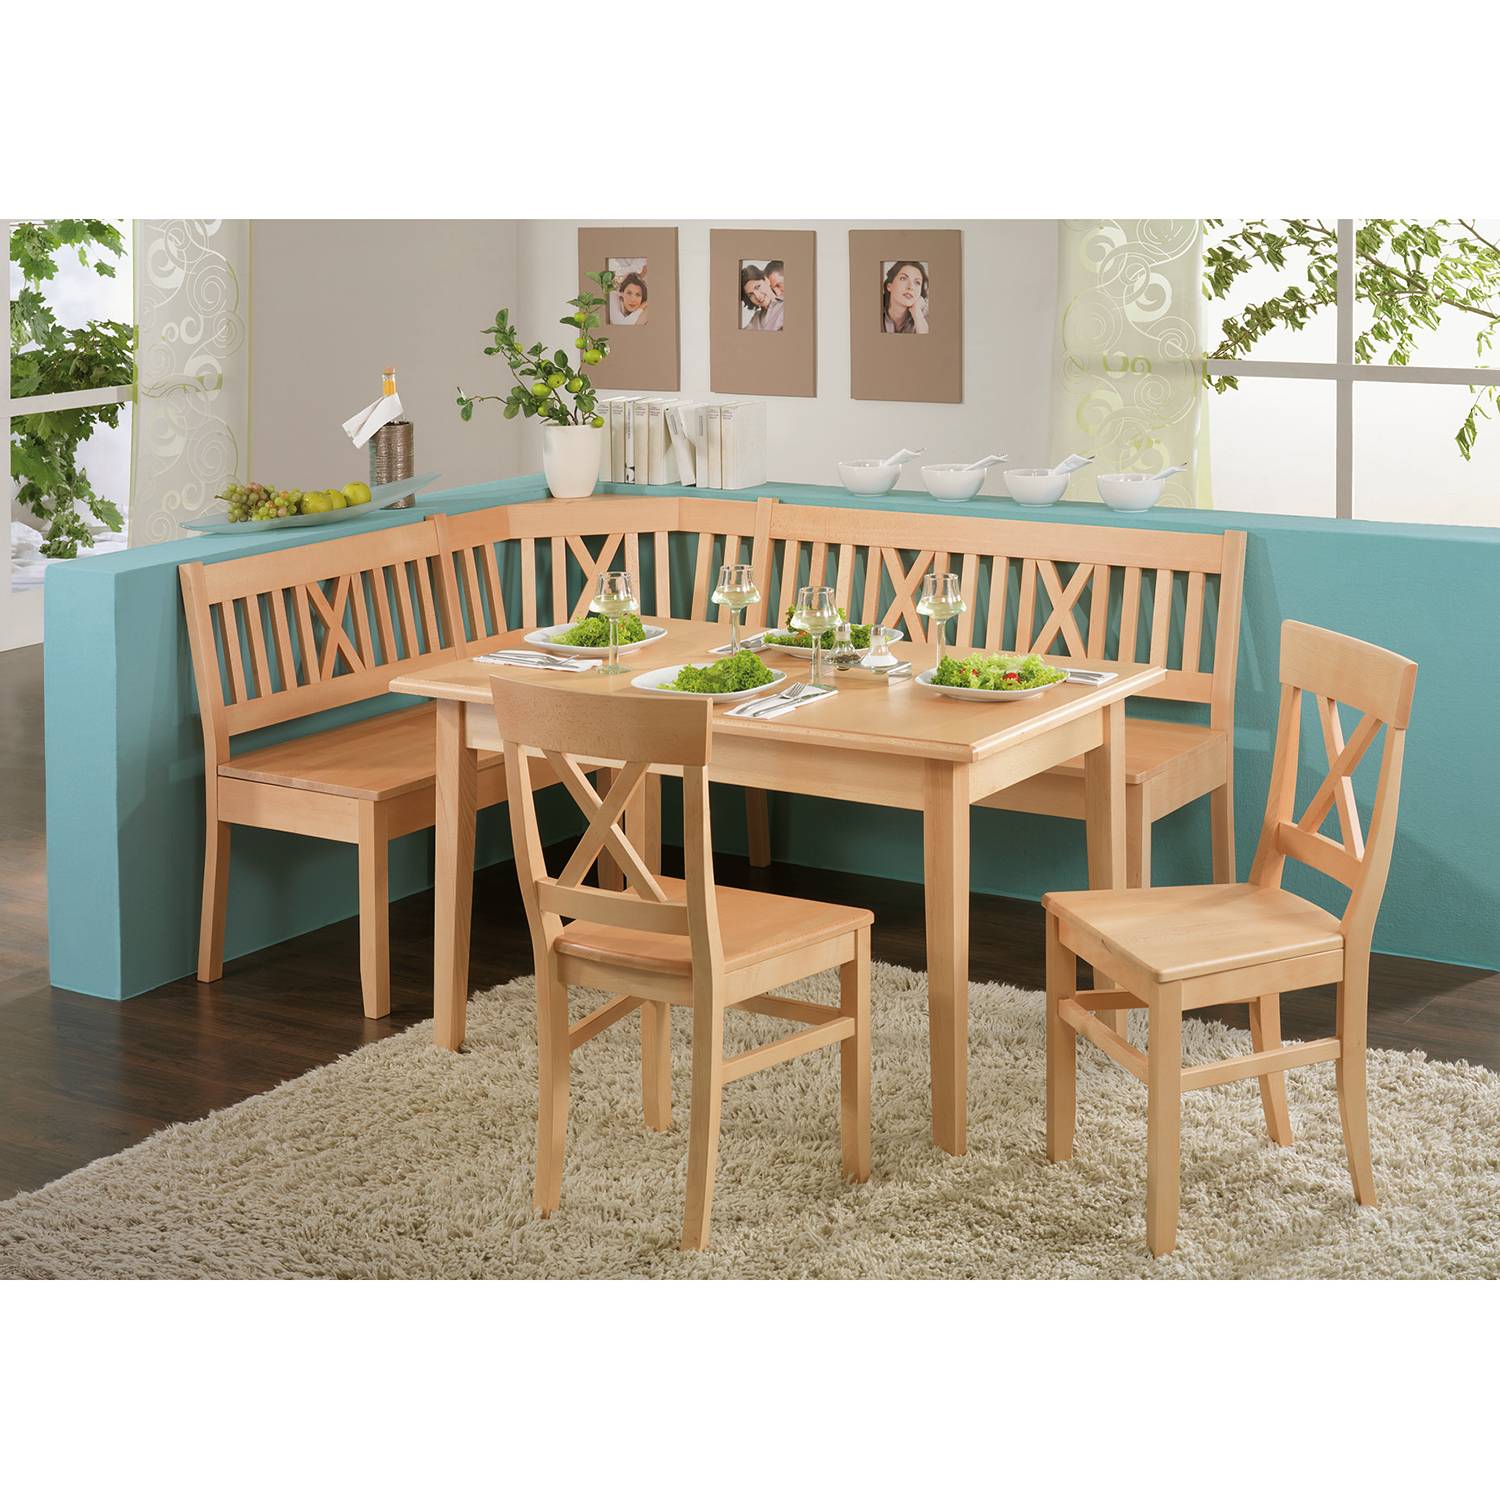 Image of Table Linz 000000001000191392